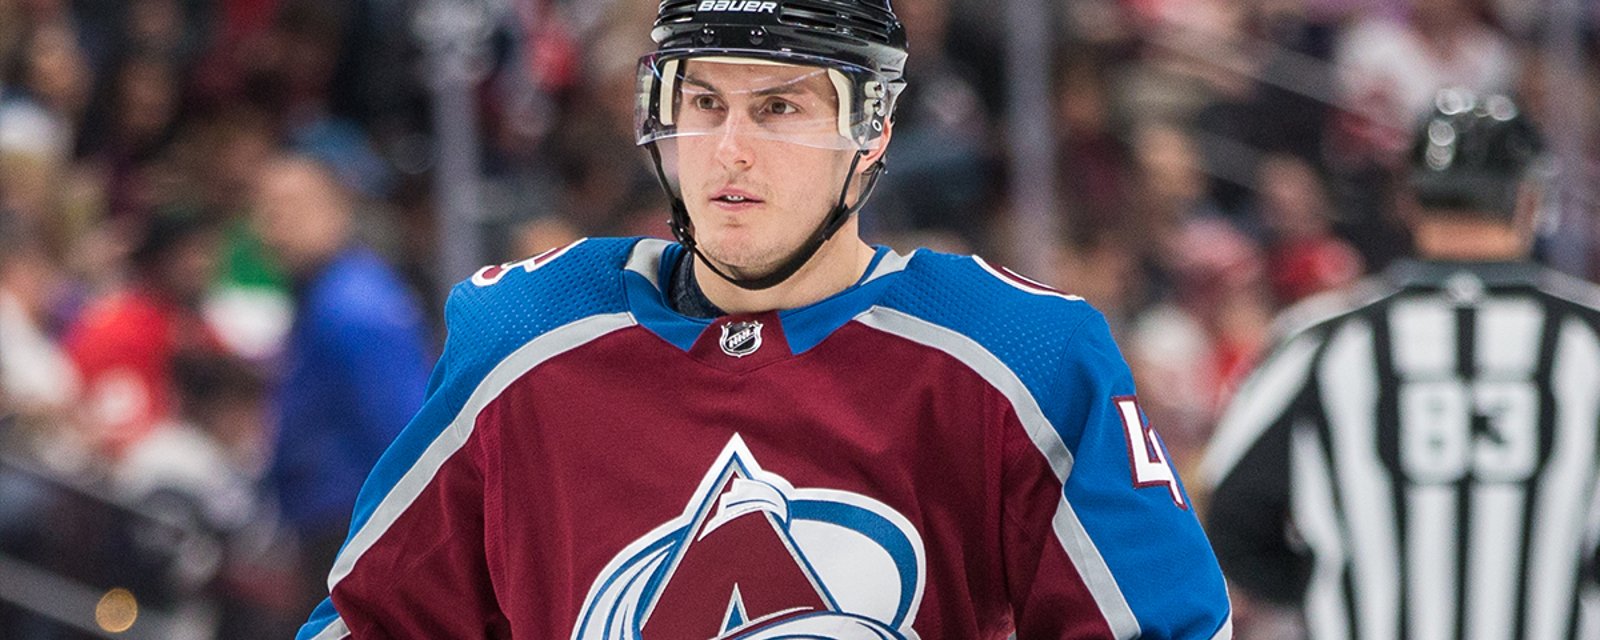 Rumor: Two Canadian teams pursuing Avs’ Barrie “heavily” 